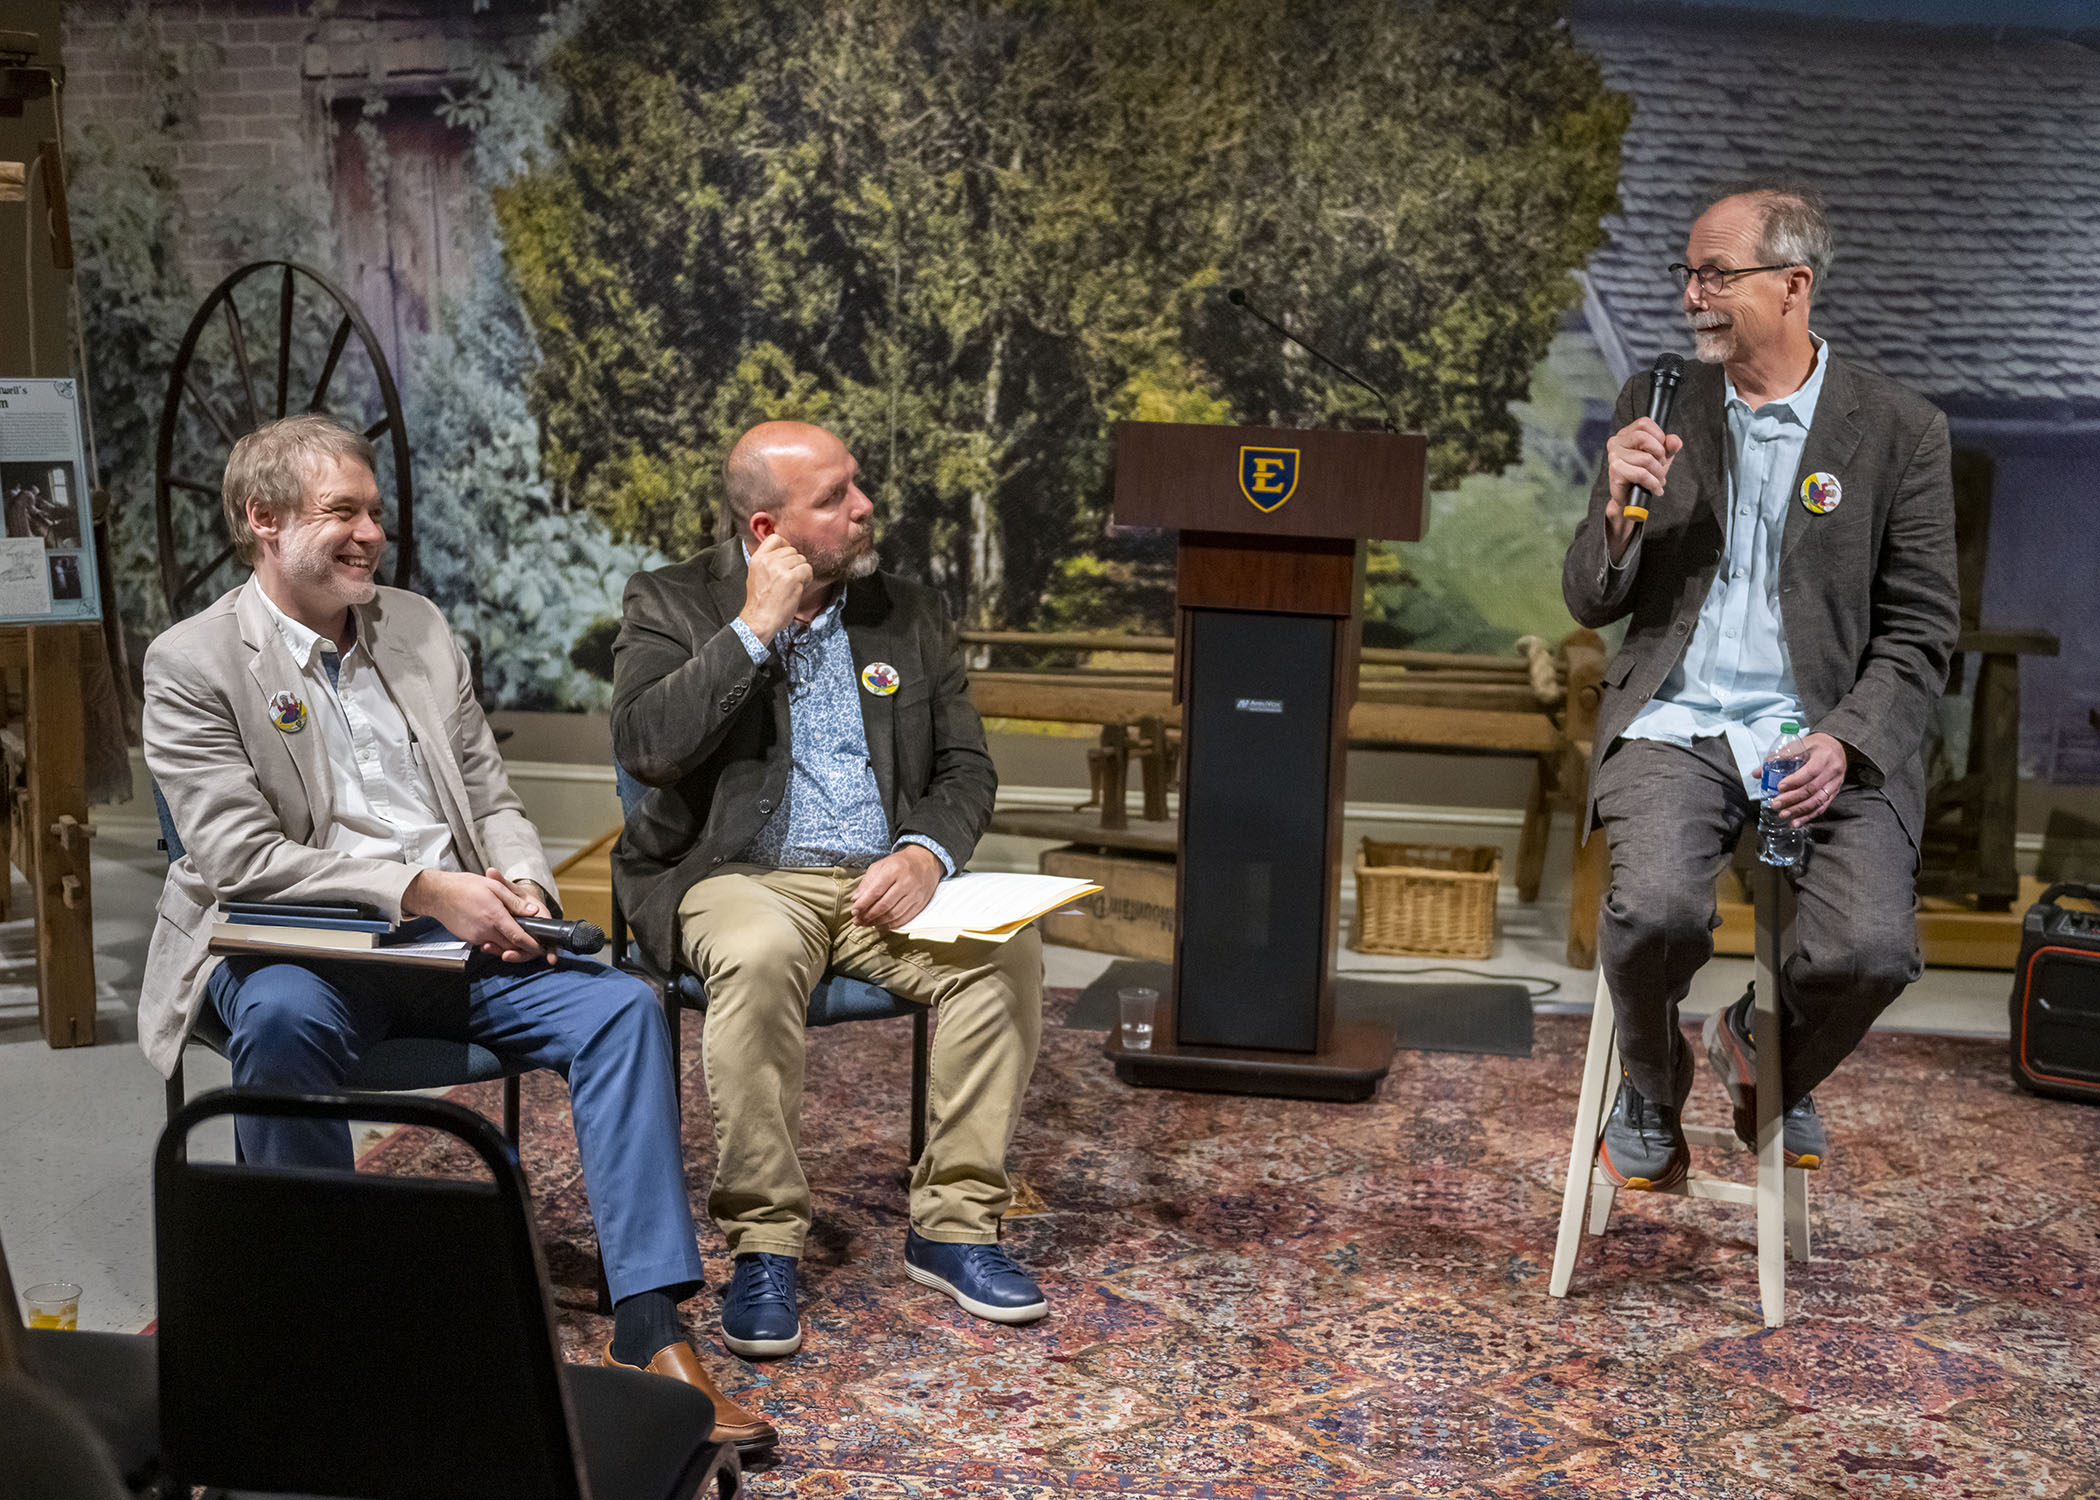 Keynote speaker Daniel Wallace joins a roundtable discussion with Dr. Jesse Graves and Dr. Scott Honeycutt to discuss his new memoir, This Isn't Going to End Well, and the legacy of William Nealy.  